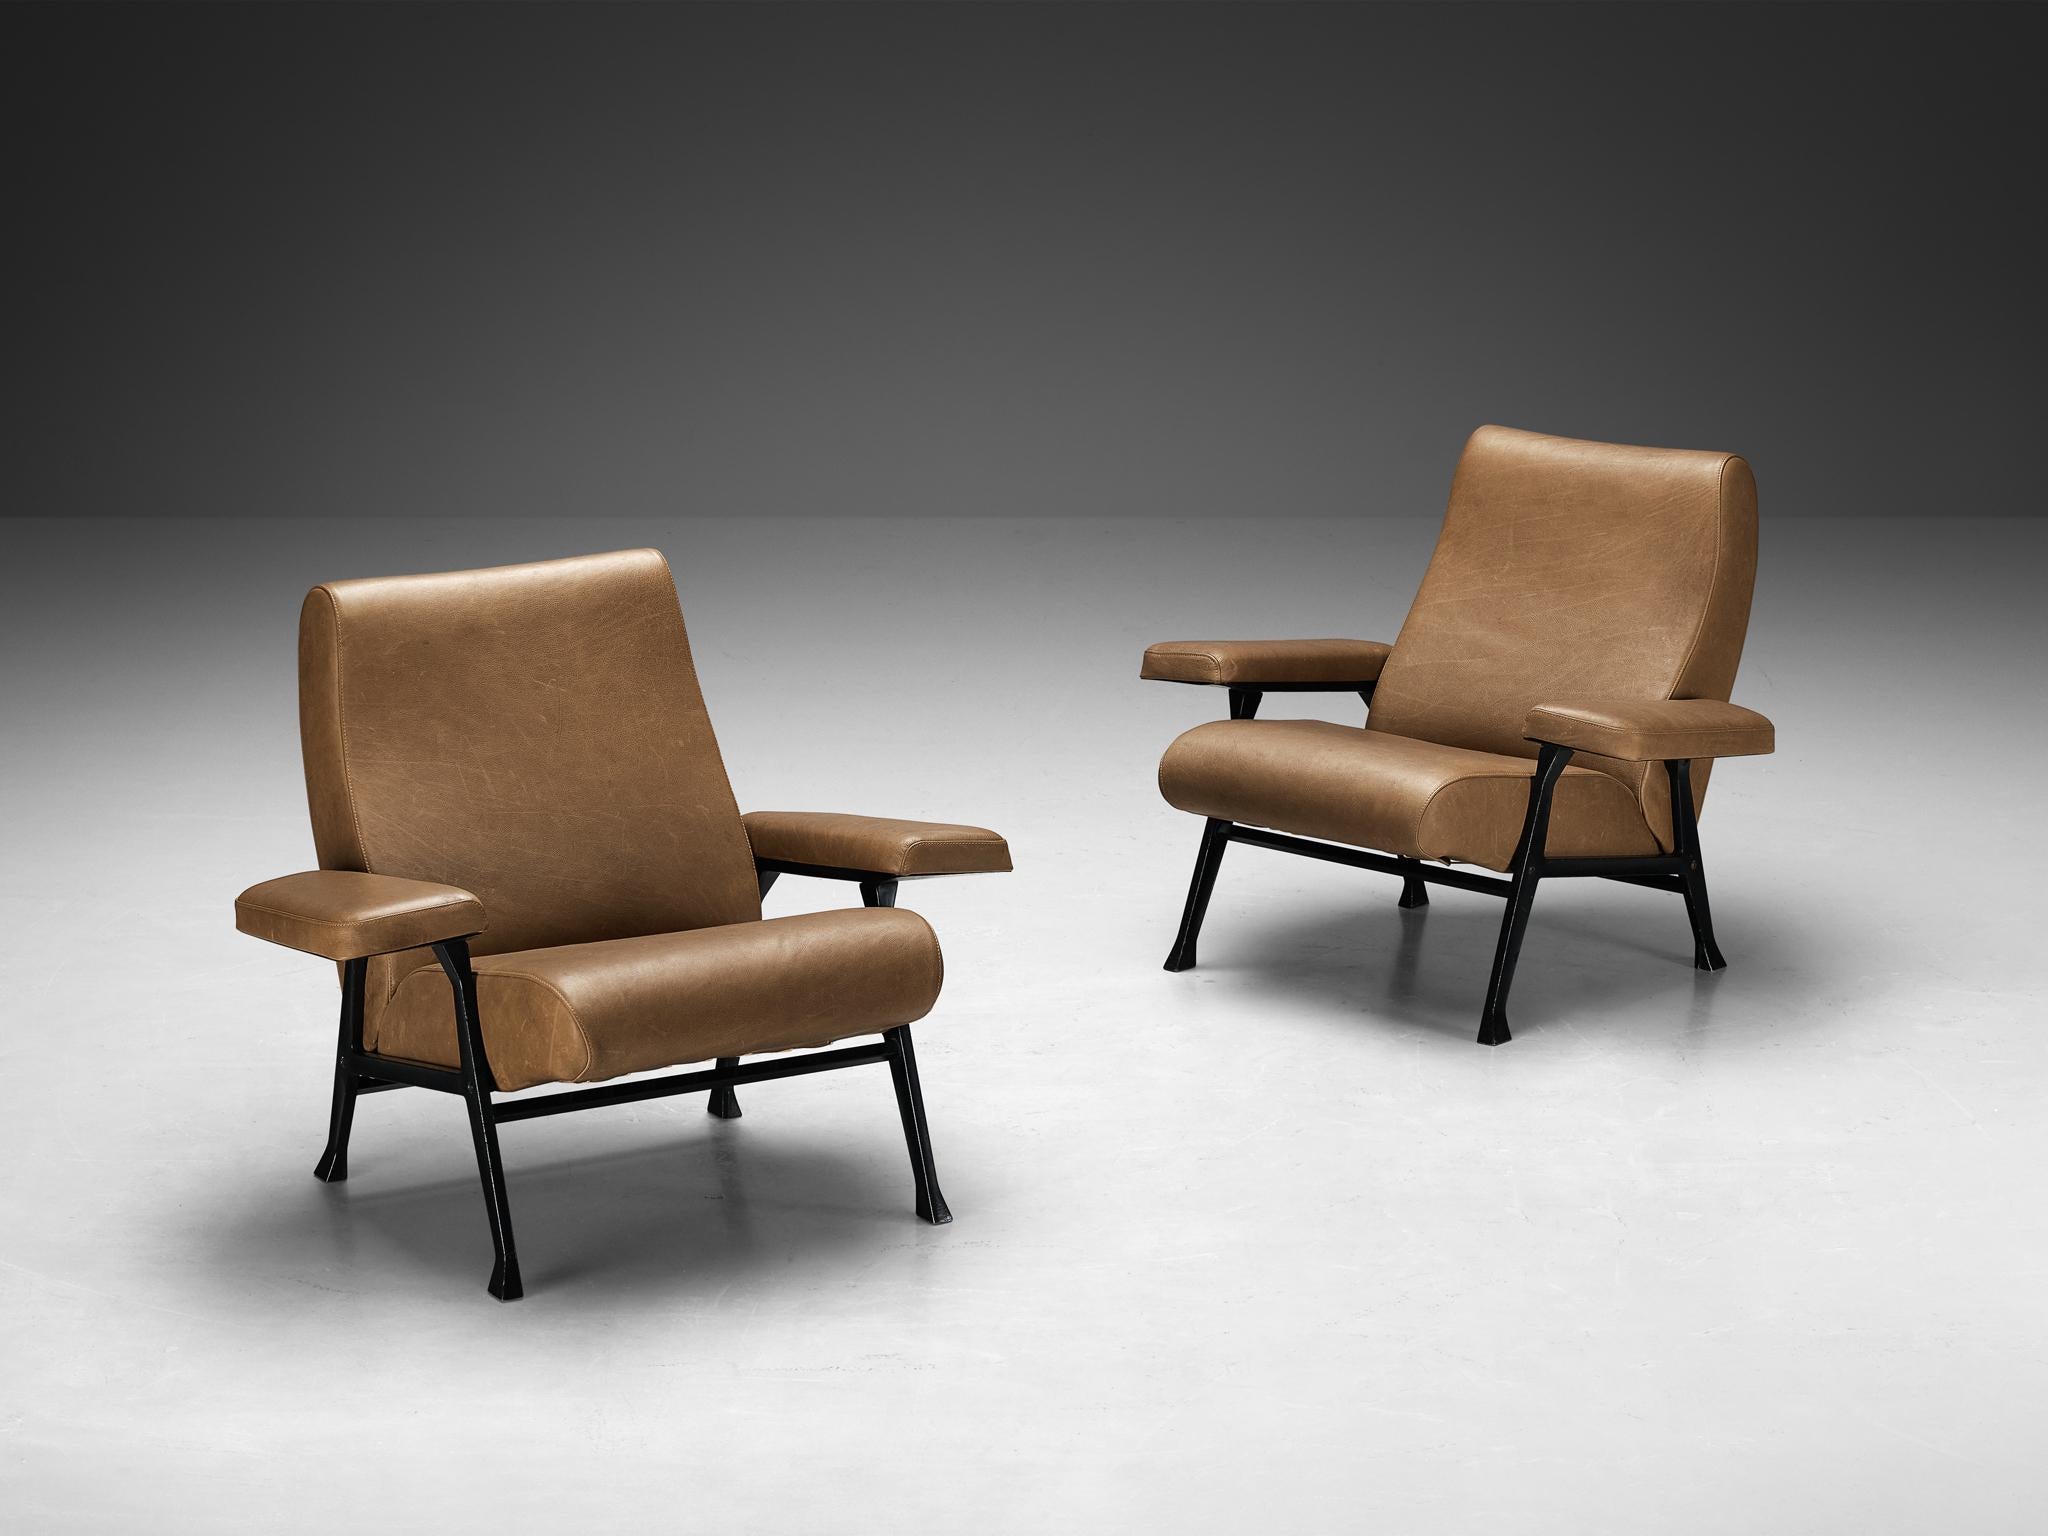 Roberto Menghi for Arflex, pair of ‘Hall’ lounge chairs, metal, leather, Italy, 1958

In 1958, Roberto Menghi designs an interesting series of armchairs and sofas for Arflex. The designer titled the designs as the ‘Hall’ collection. A year later,